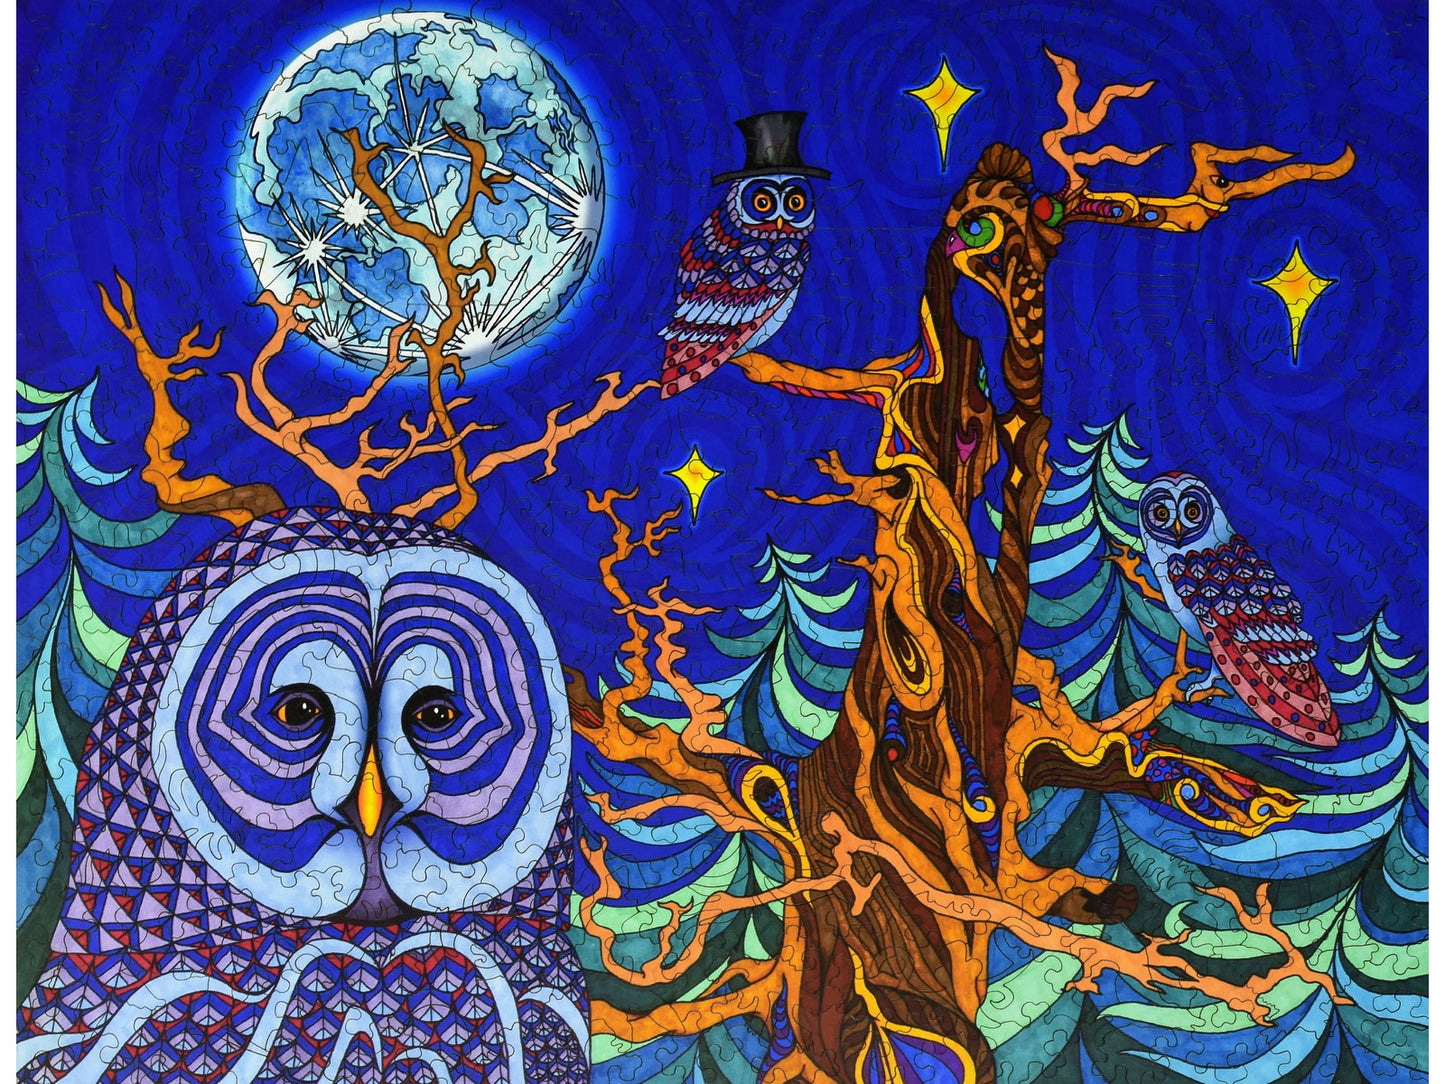 The front of the puzzle, The Night Owls, which shows three owls in a forest at night, under the full moon.